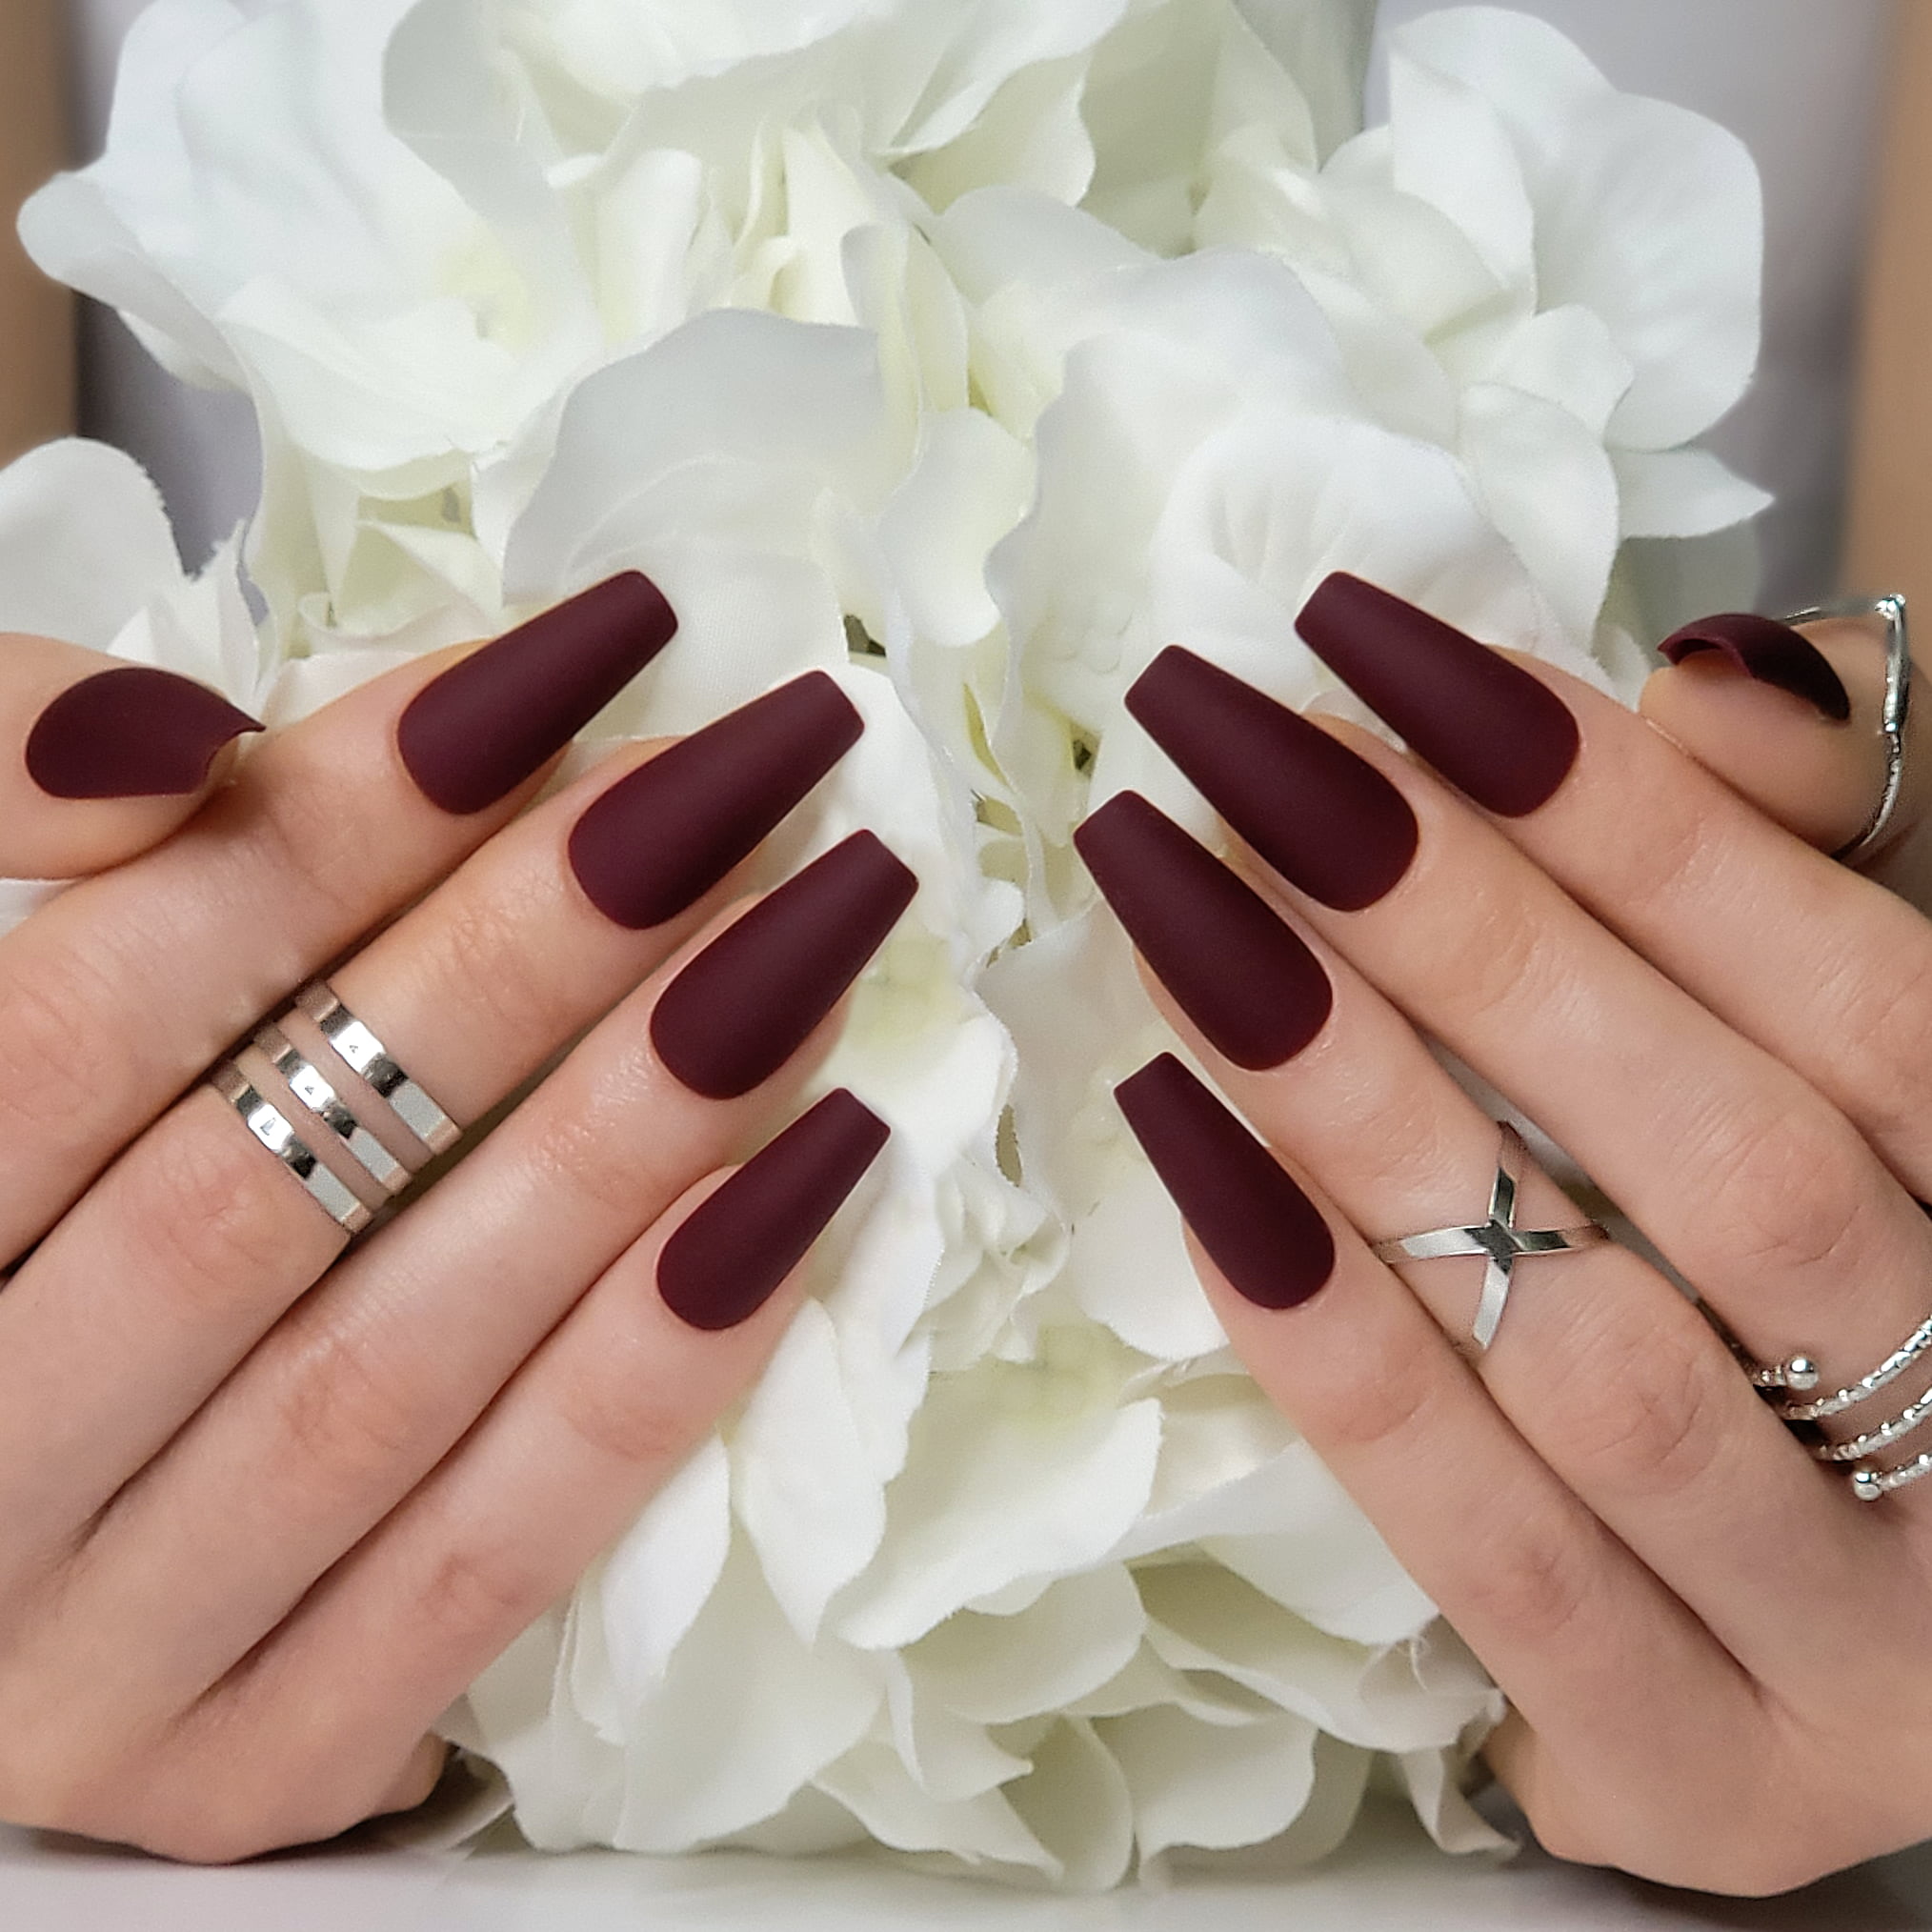 Download A Woman's Hand With Burgundy And Silver Nails | Wallpapers.com